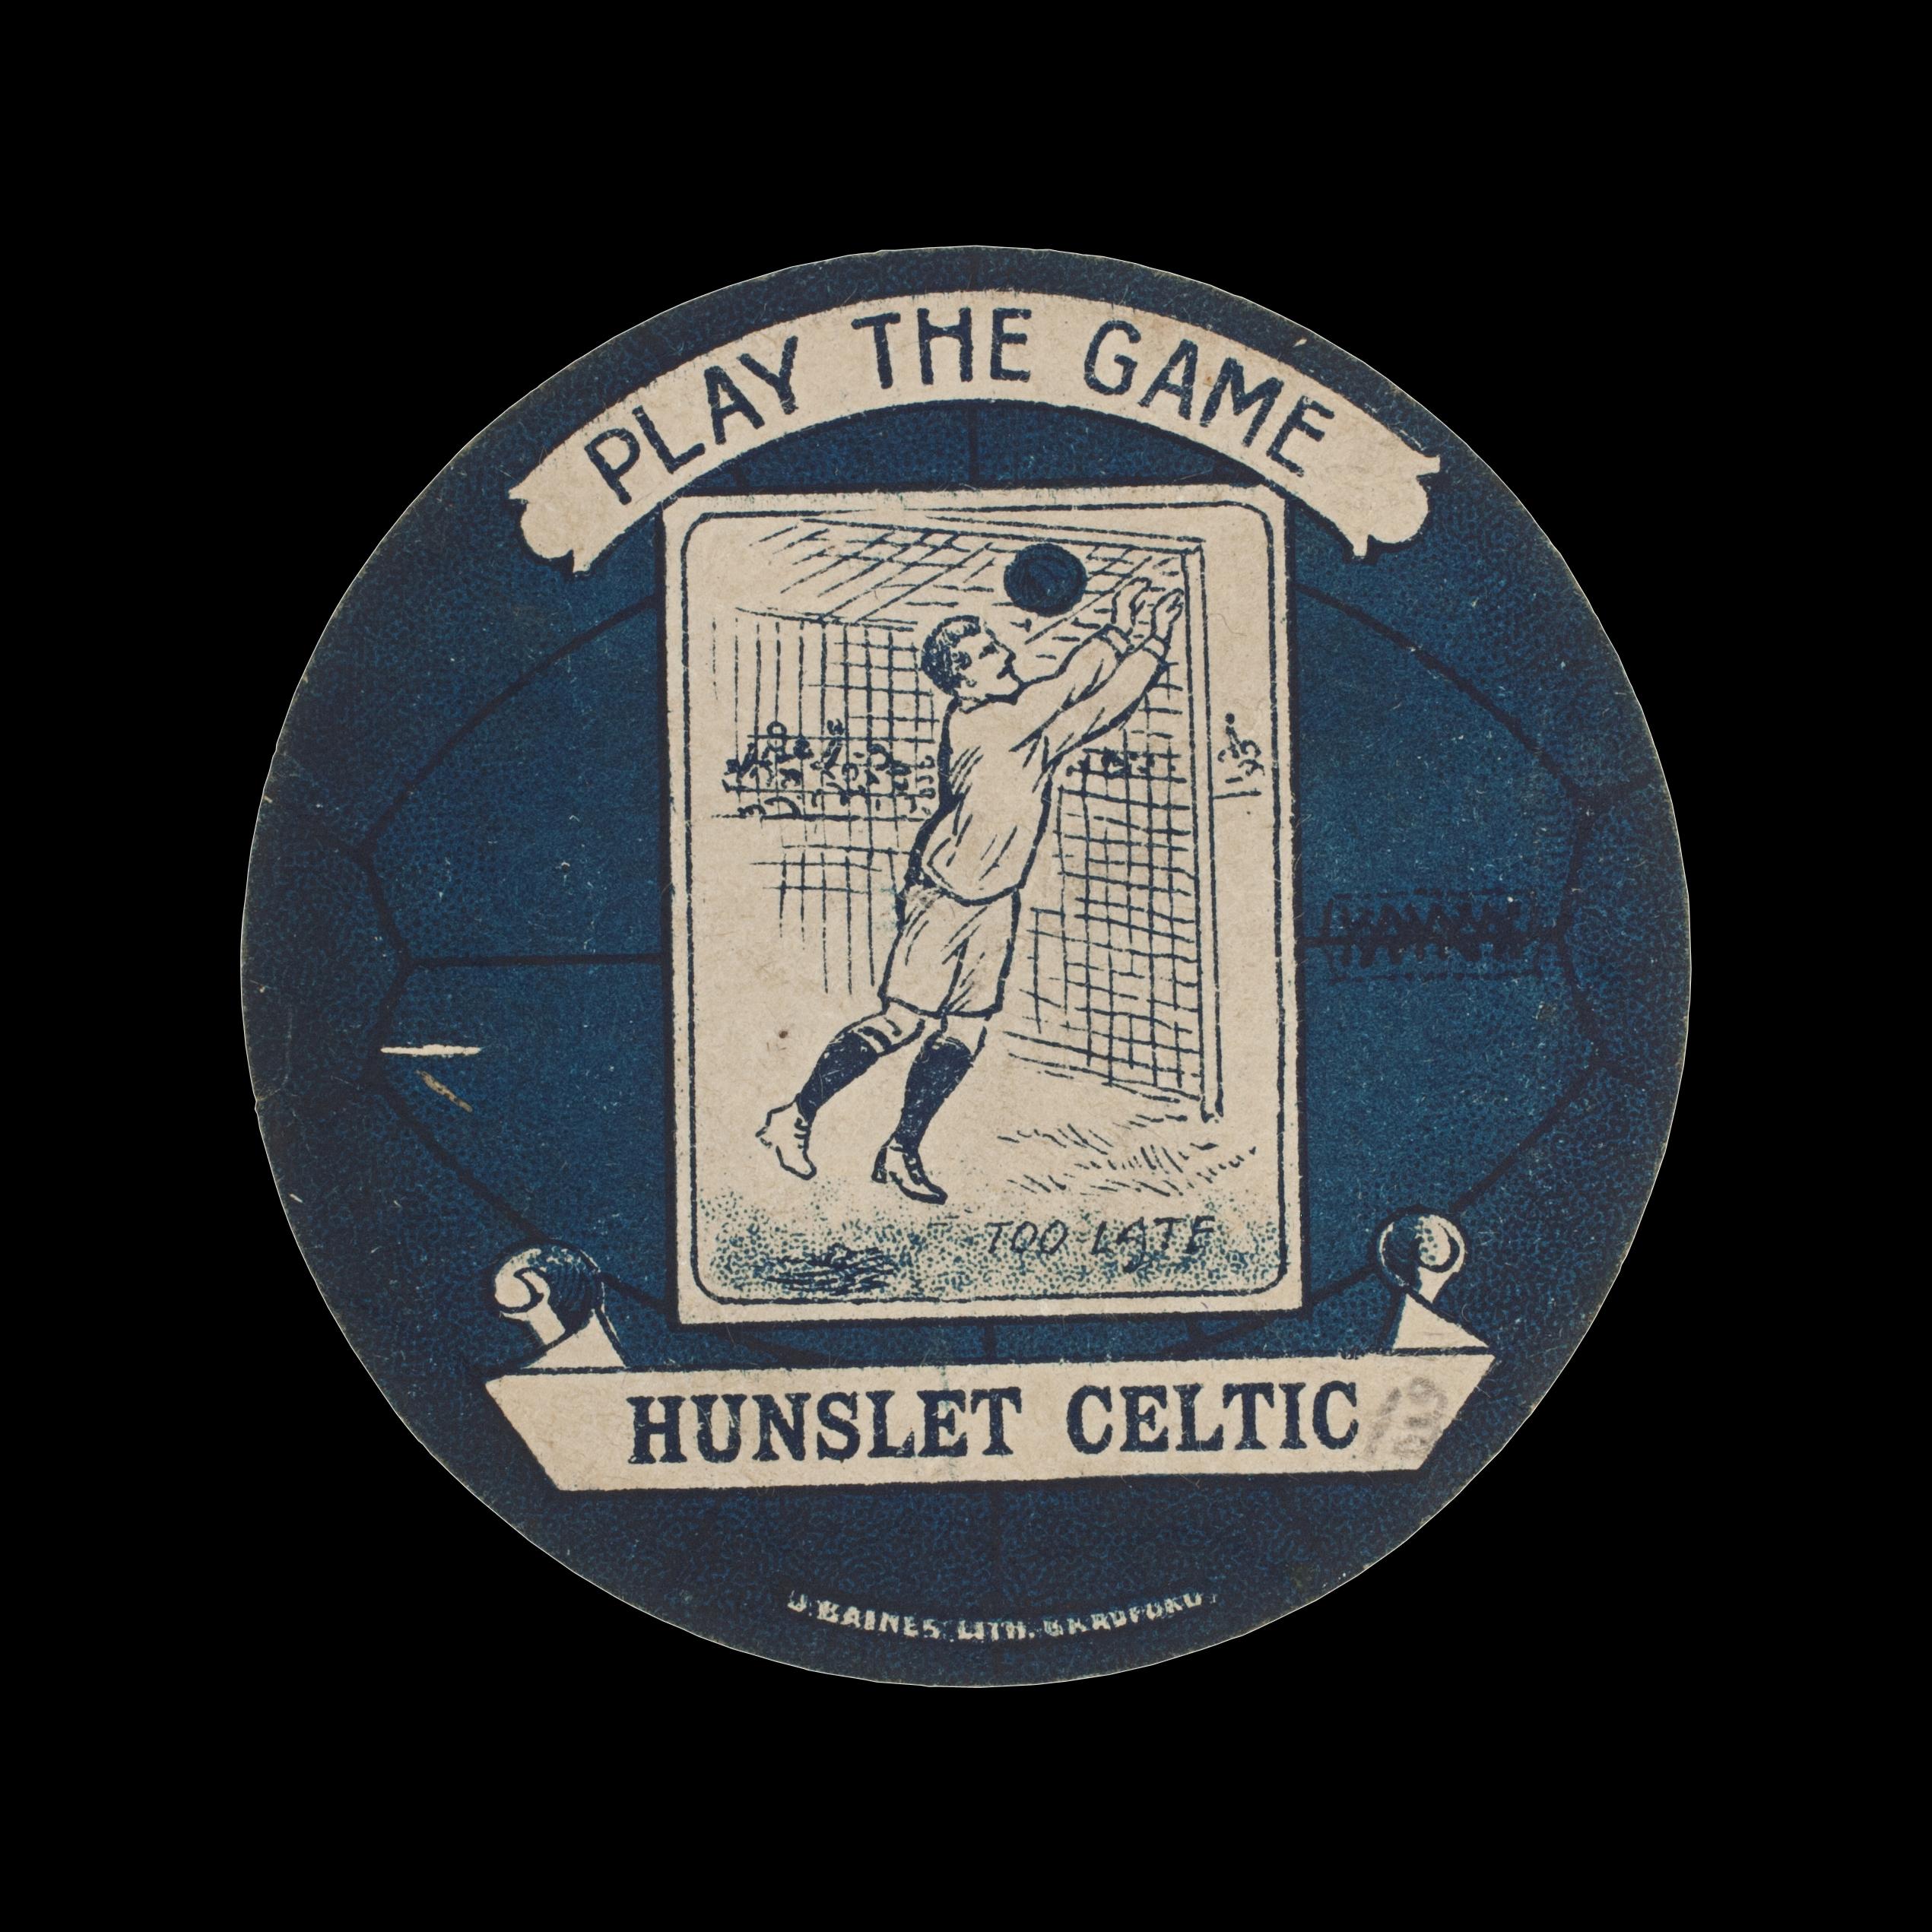 British Baines Football Trade Card, Hunslet Celtic, Play The Game For Sale